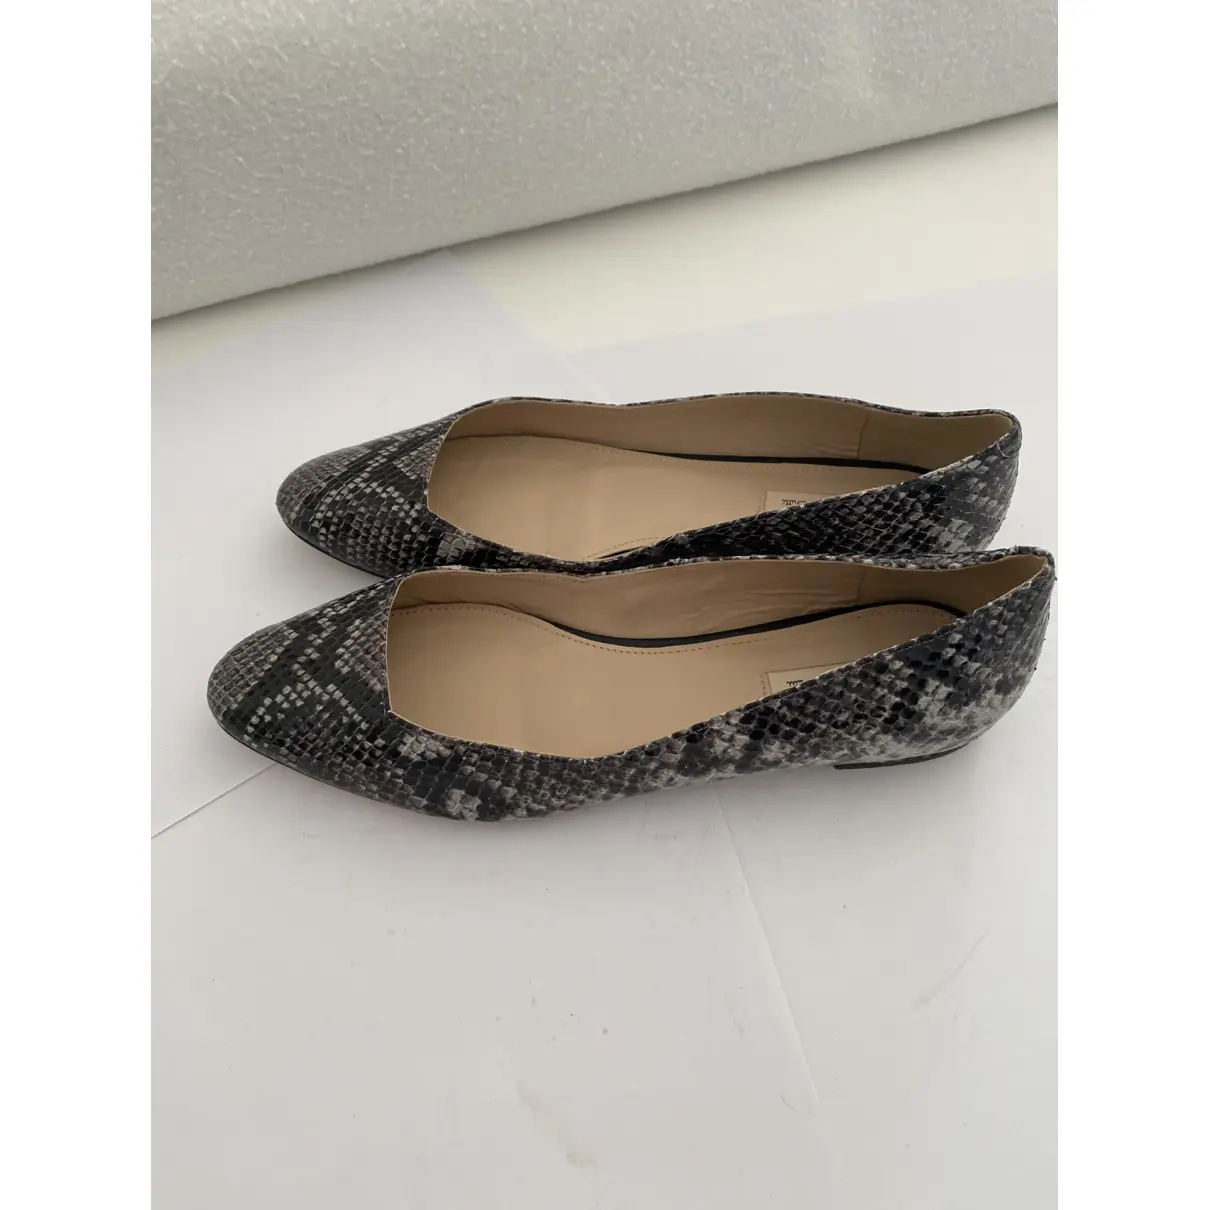 Buy Massimo Dutti Leather ballet flats online